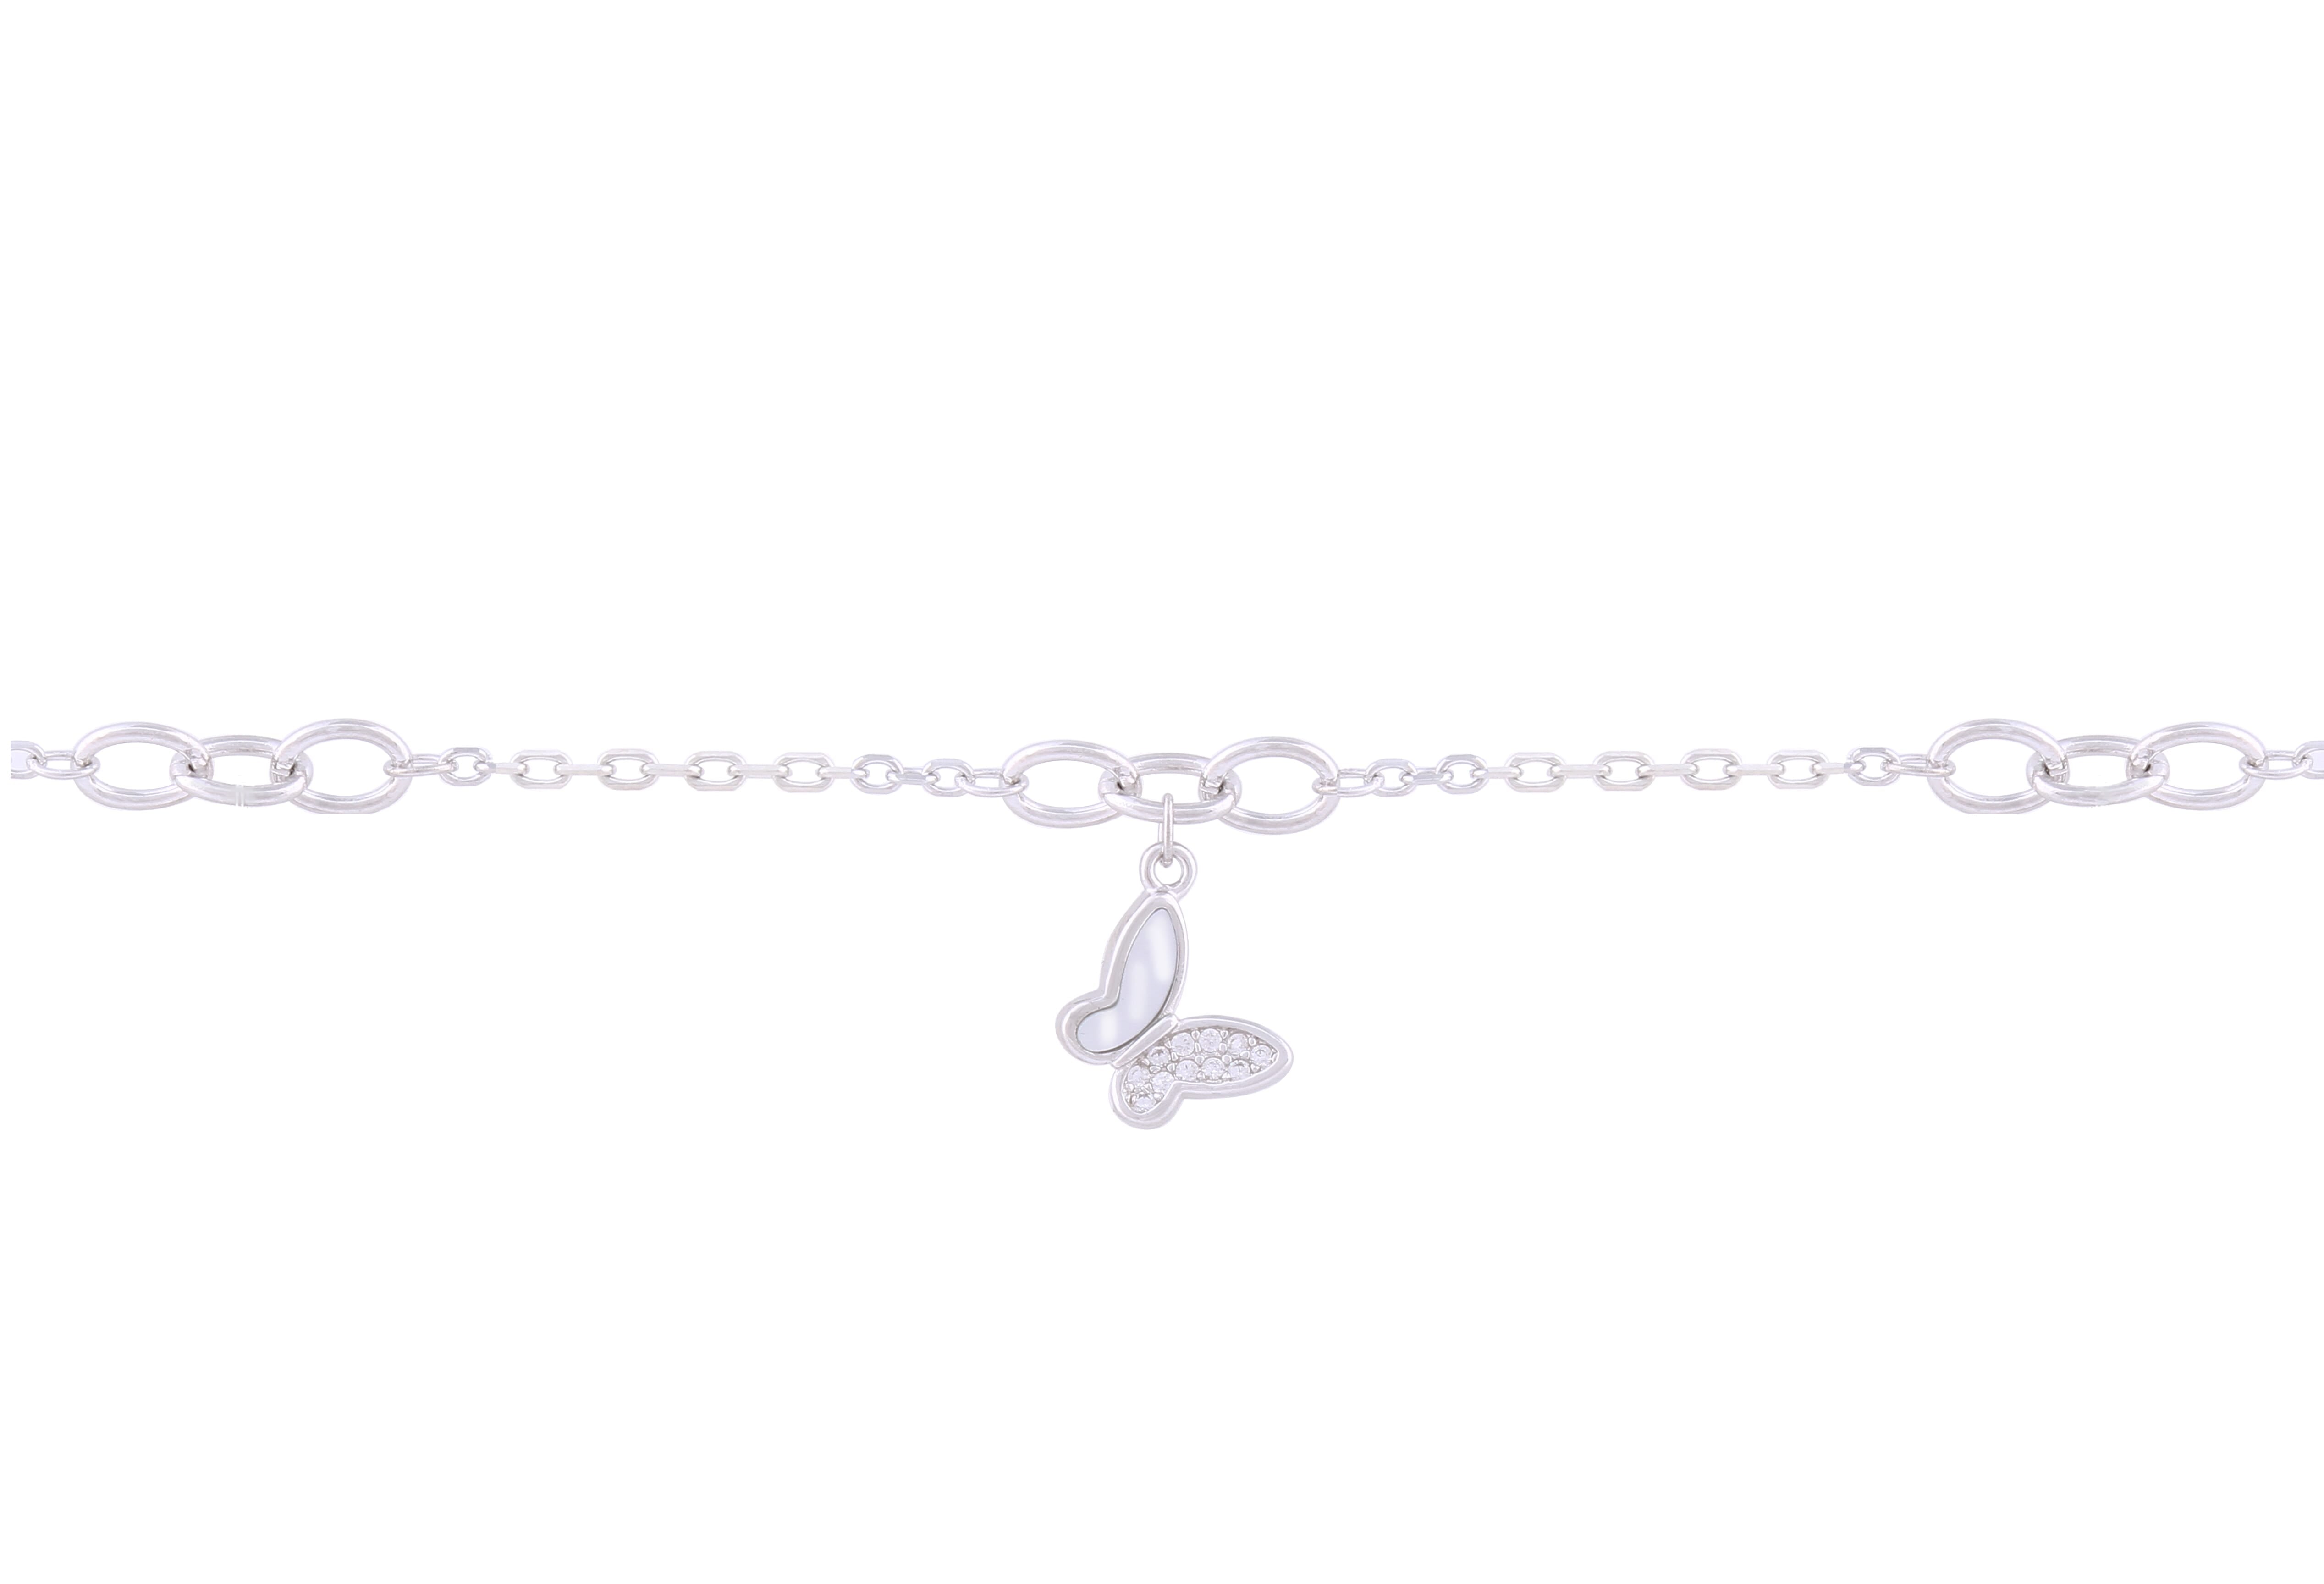 Asfour 925 Sterling Silver Charm Bracelet With Butterfly Design BR0484